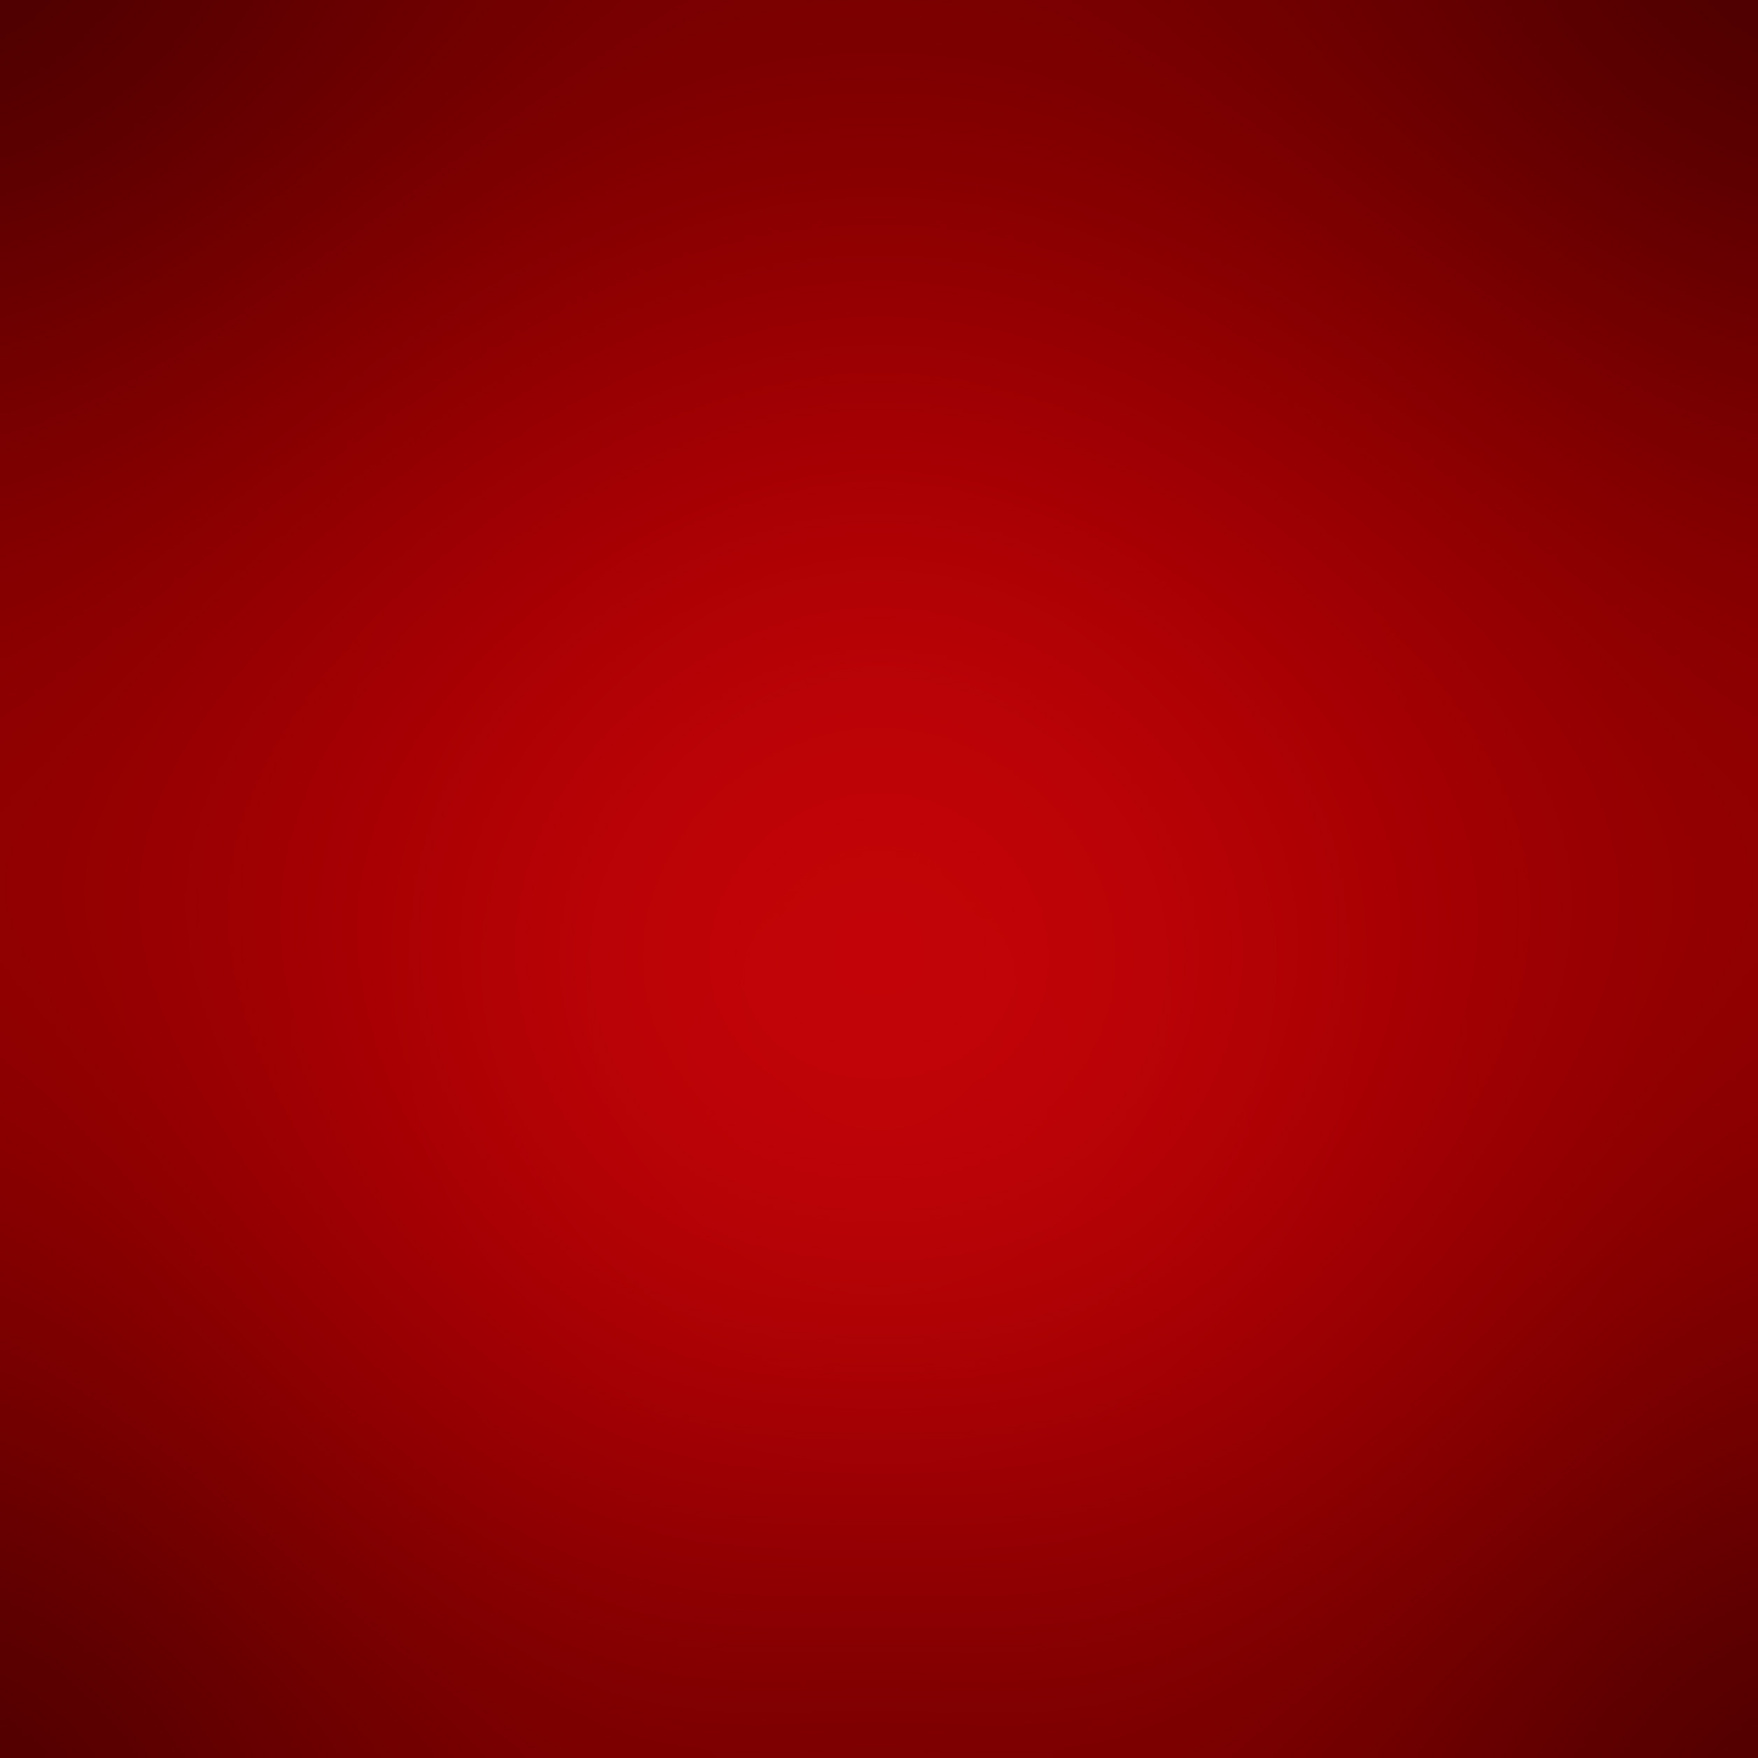 Dark Red Background. Abstract Deep Red Blurred Wallpaper, Smooth